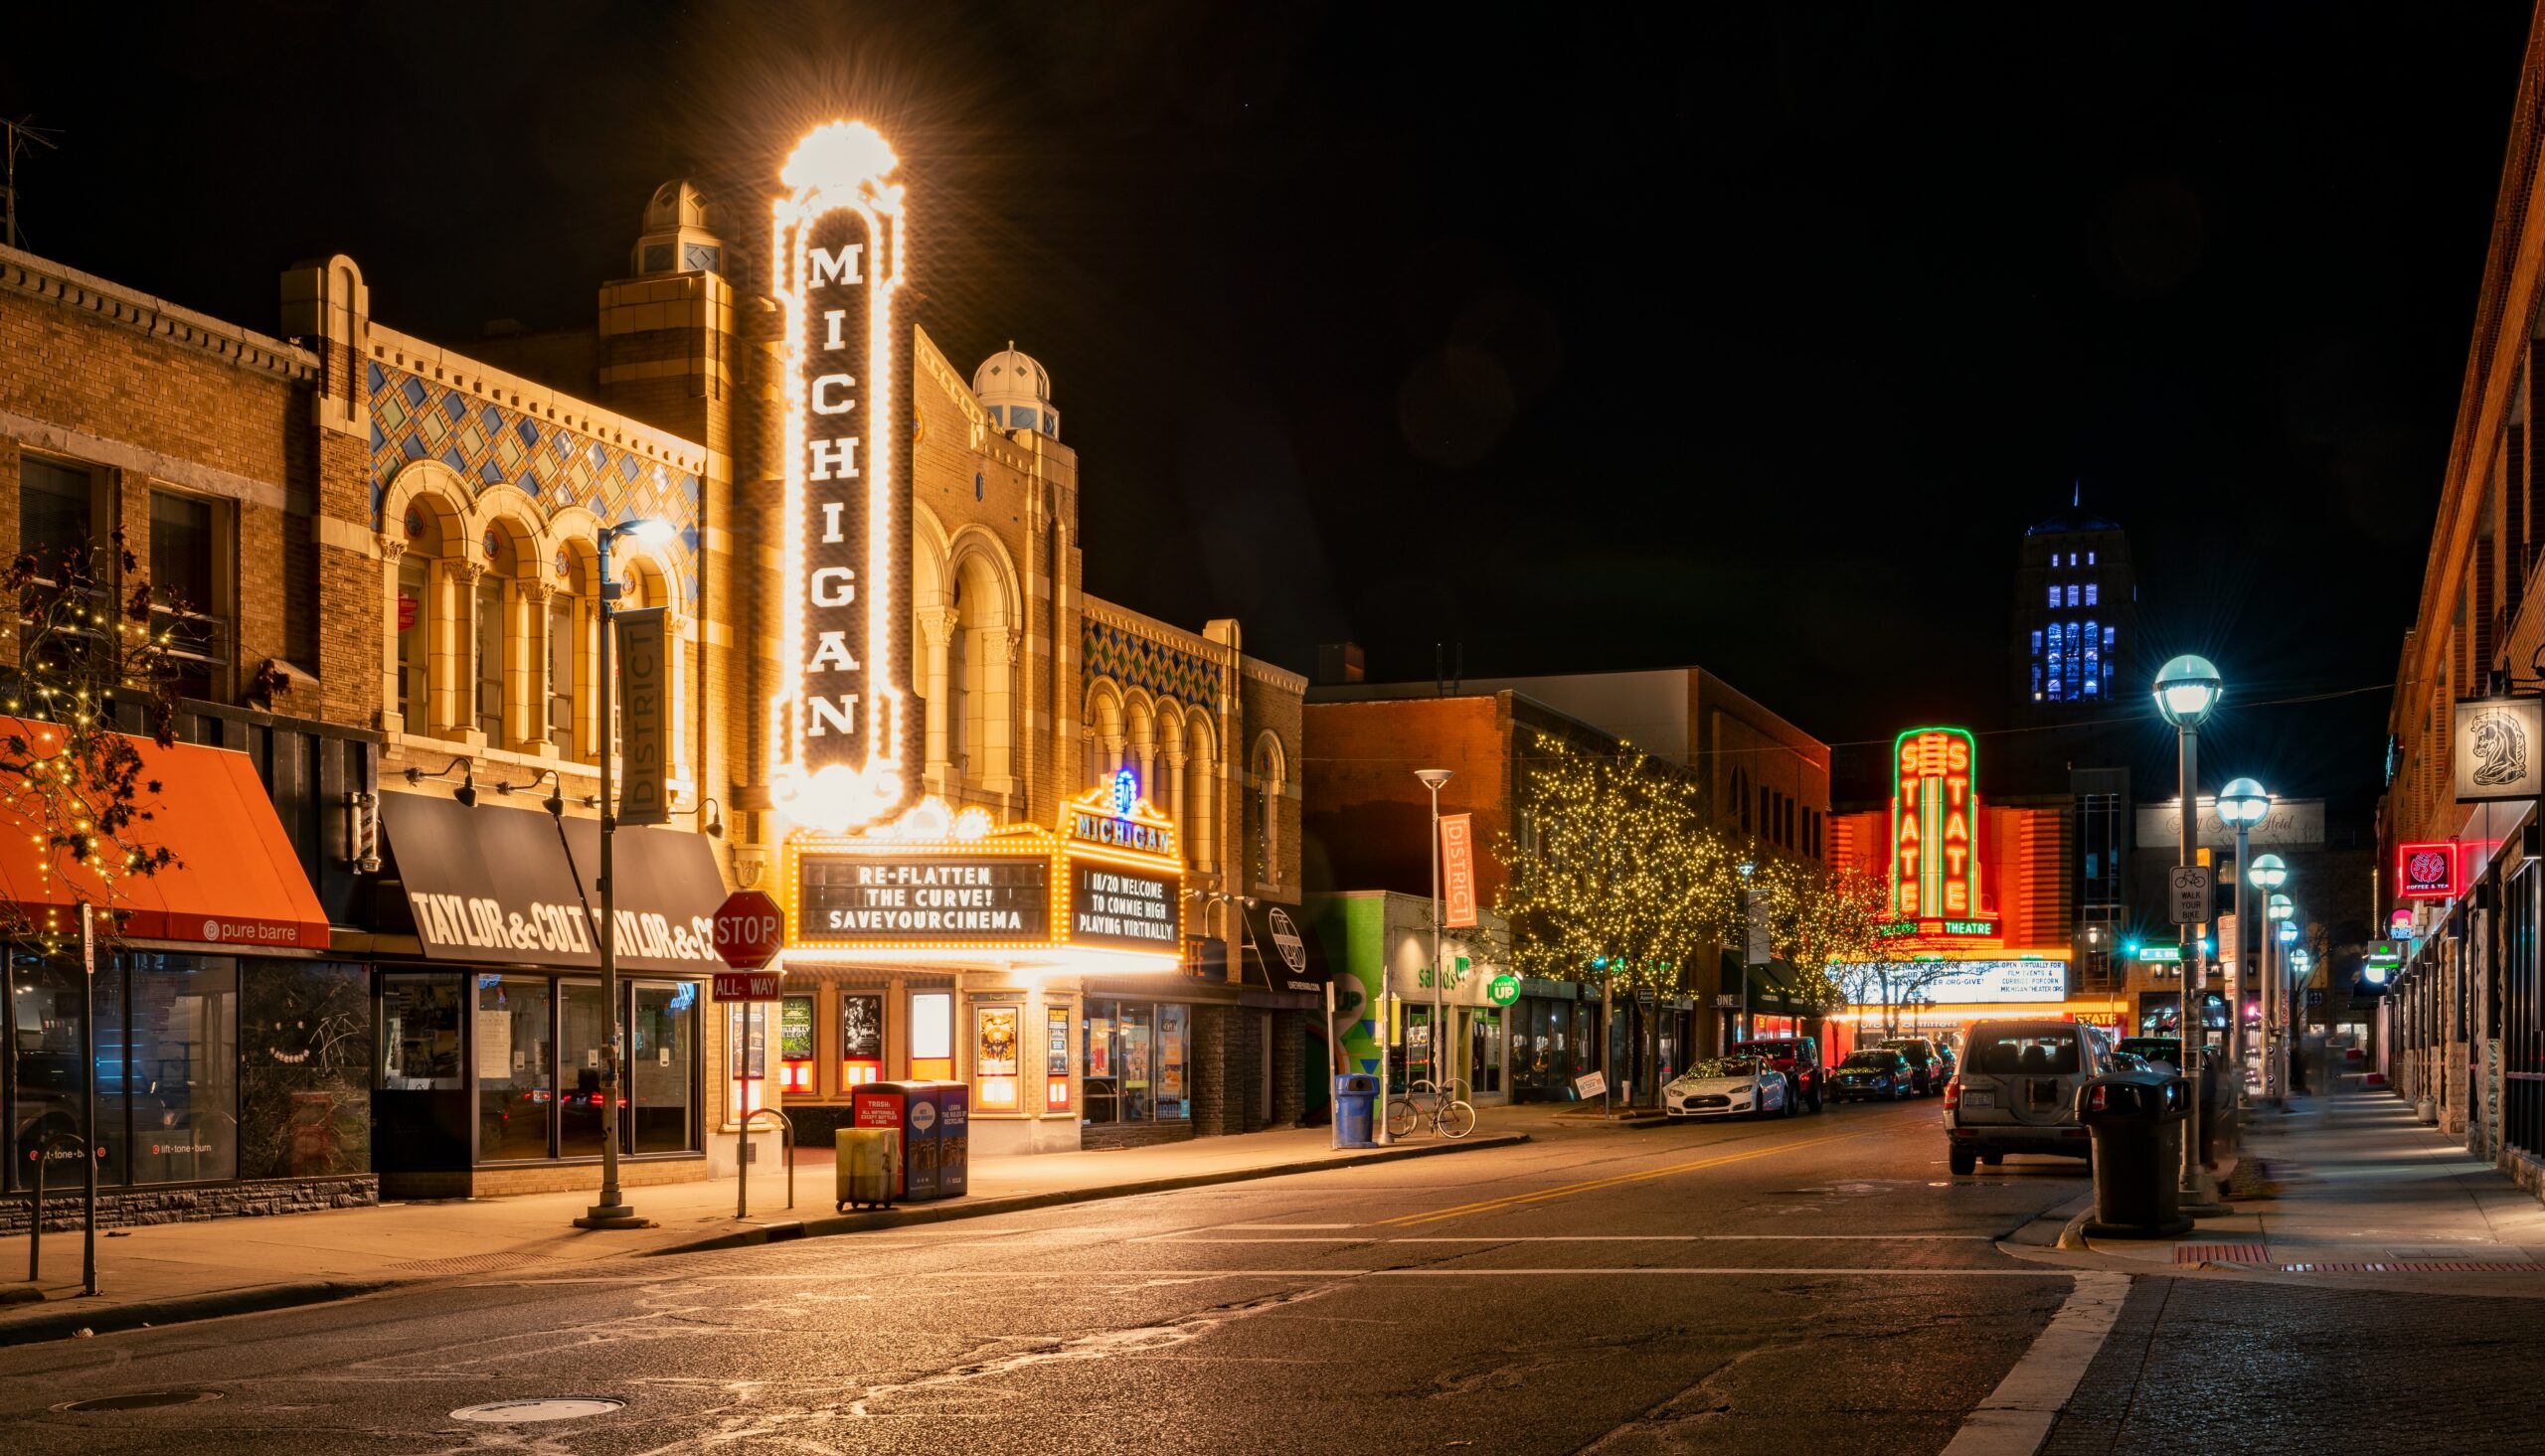 The Michigan Theater and State Theater in Ann Arbor light up an empty roadway on a dark night with flashbulb and neon signs naming their respective storefronts.